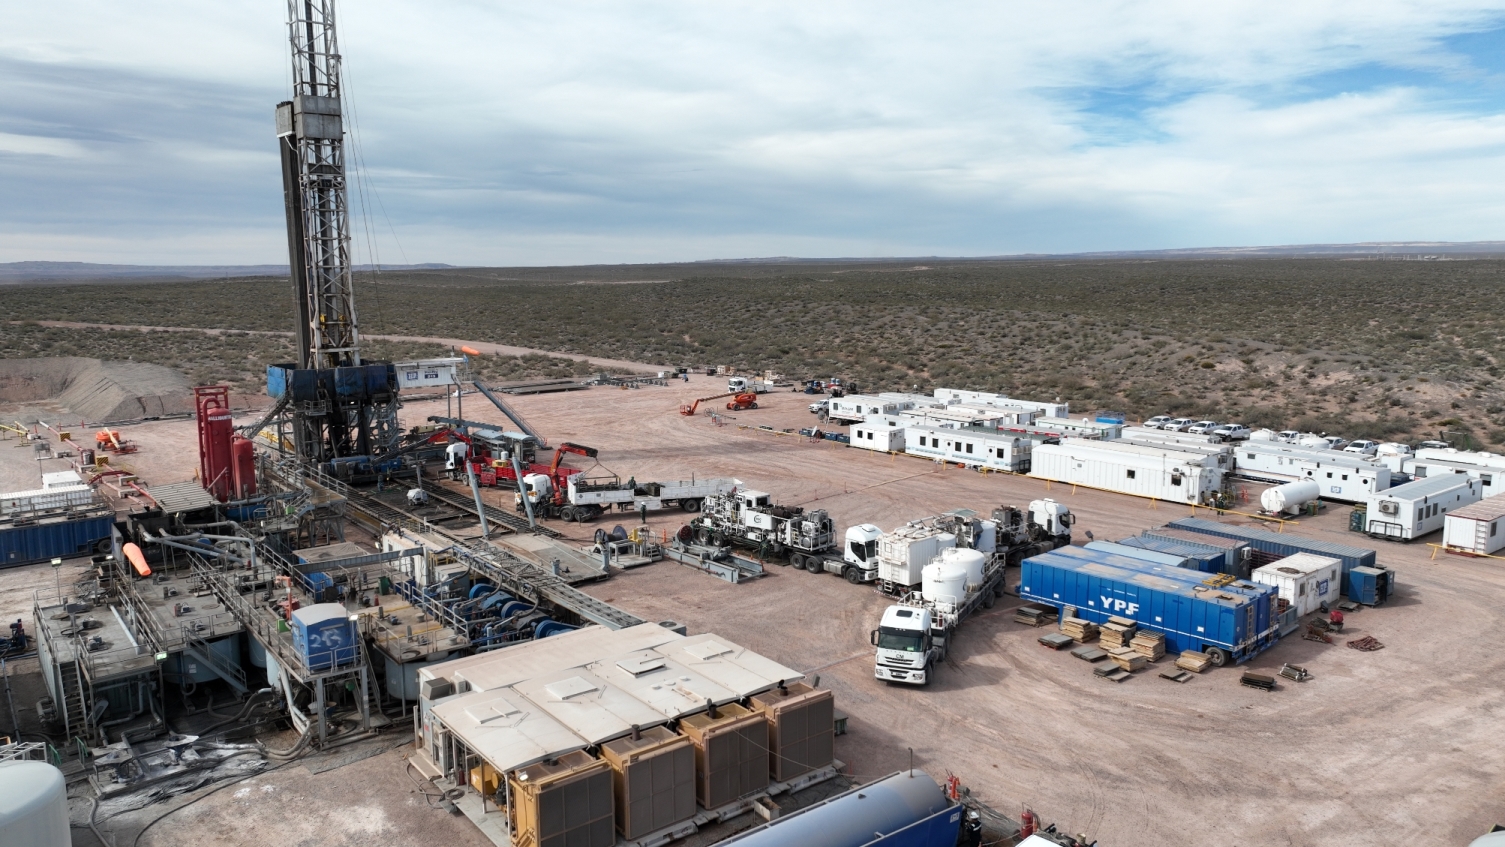 Calfrac offers primary and remedial cementing services in a variety of wells